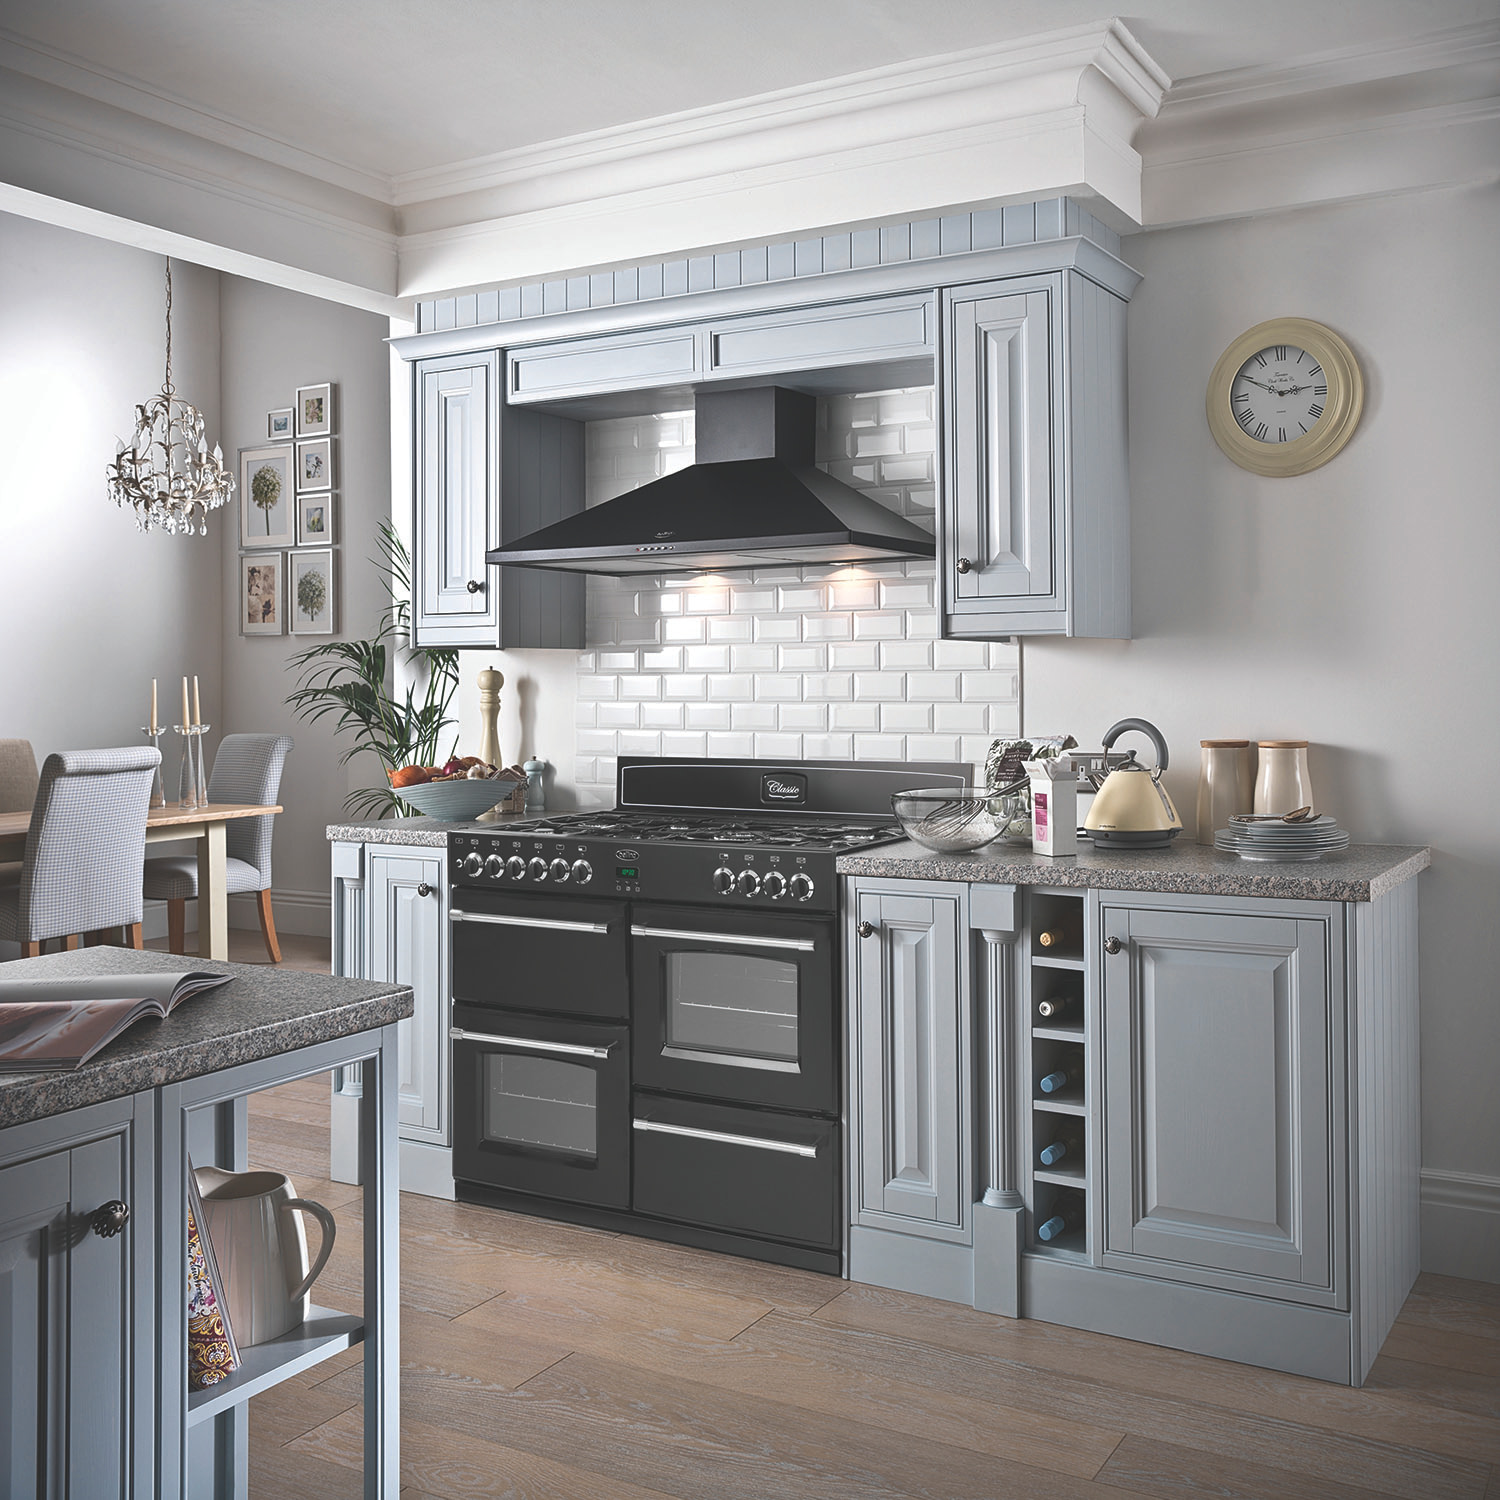 Get to know Belling and Stoves